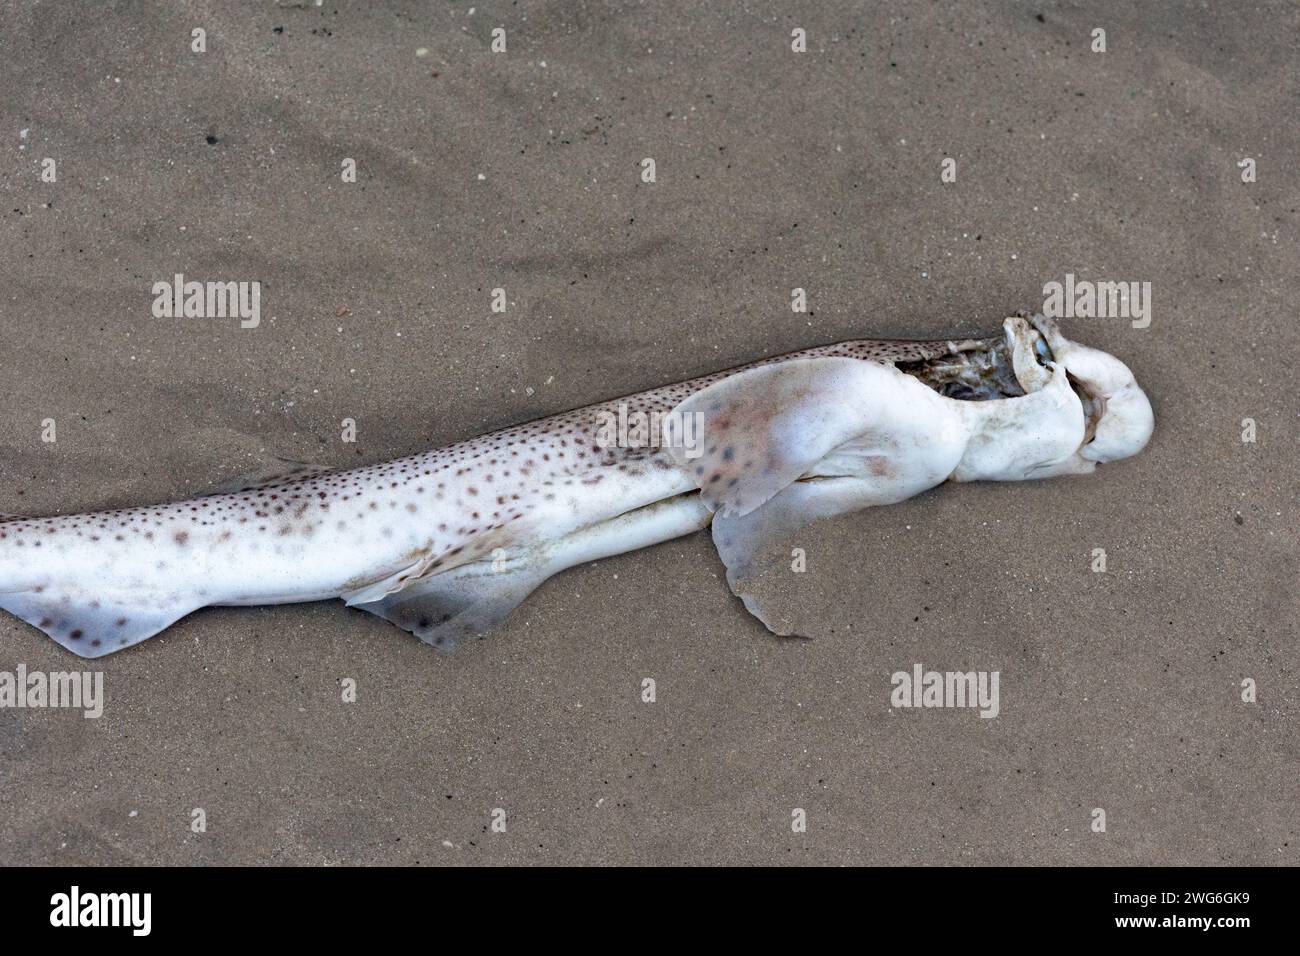 Dead dog fish washed up on the sand in Worthing, West Sussex, UK Stock Photo